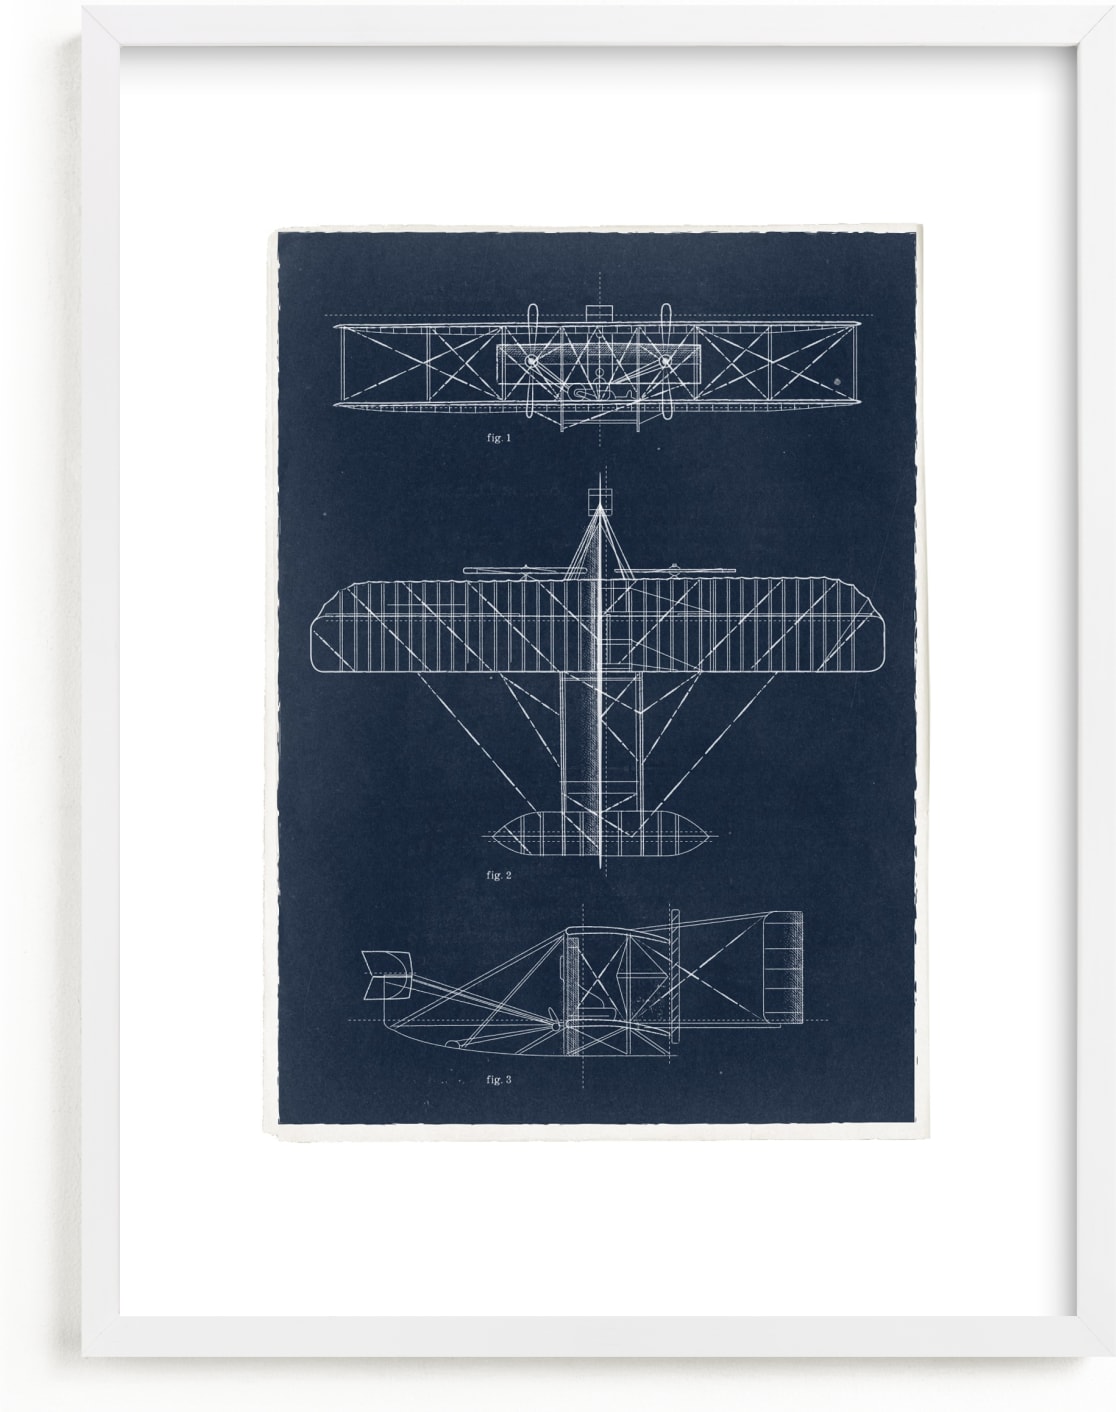 This is a blue kids wall art by Robert and Stella called Plane diagram.